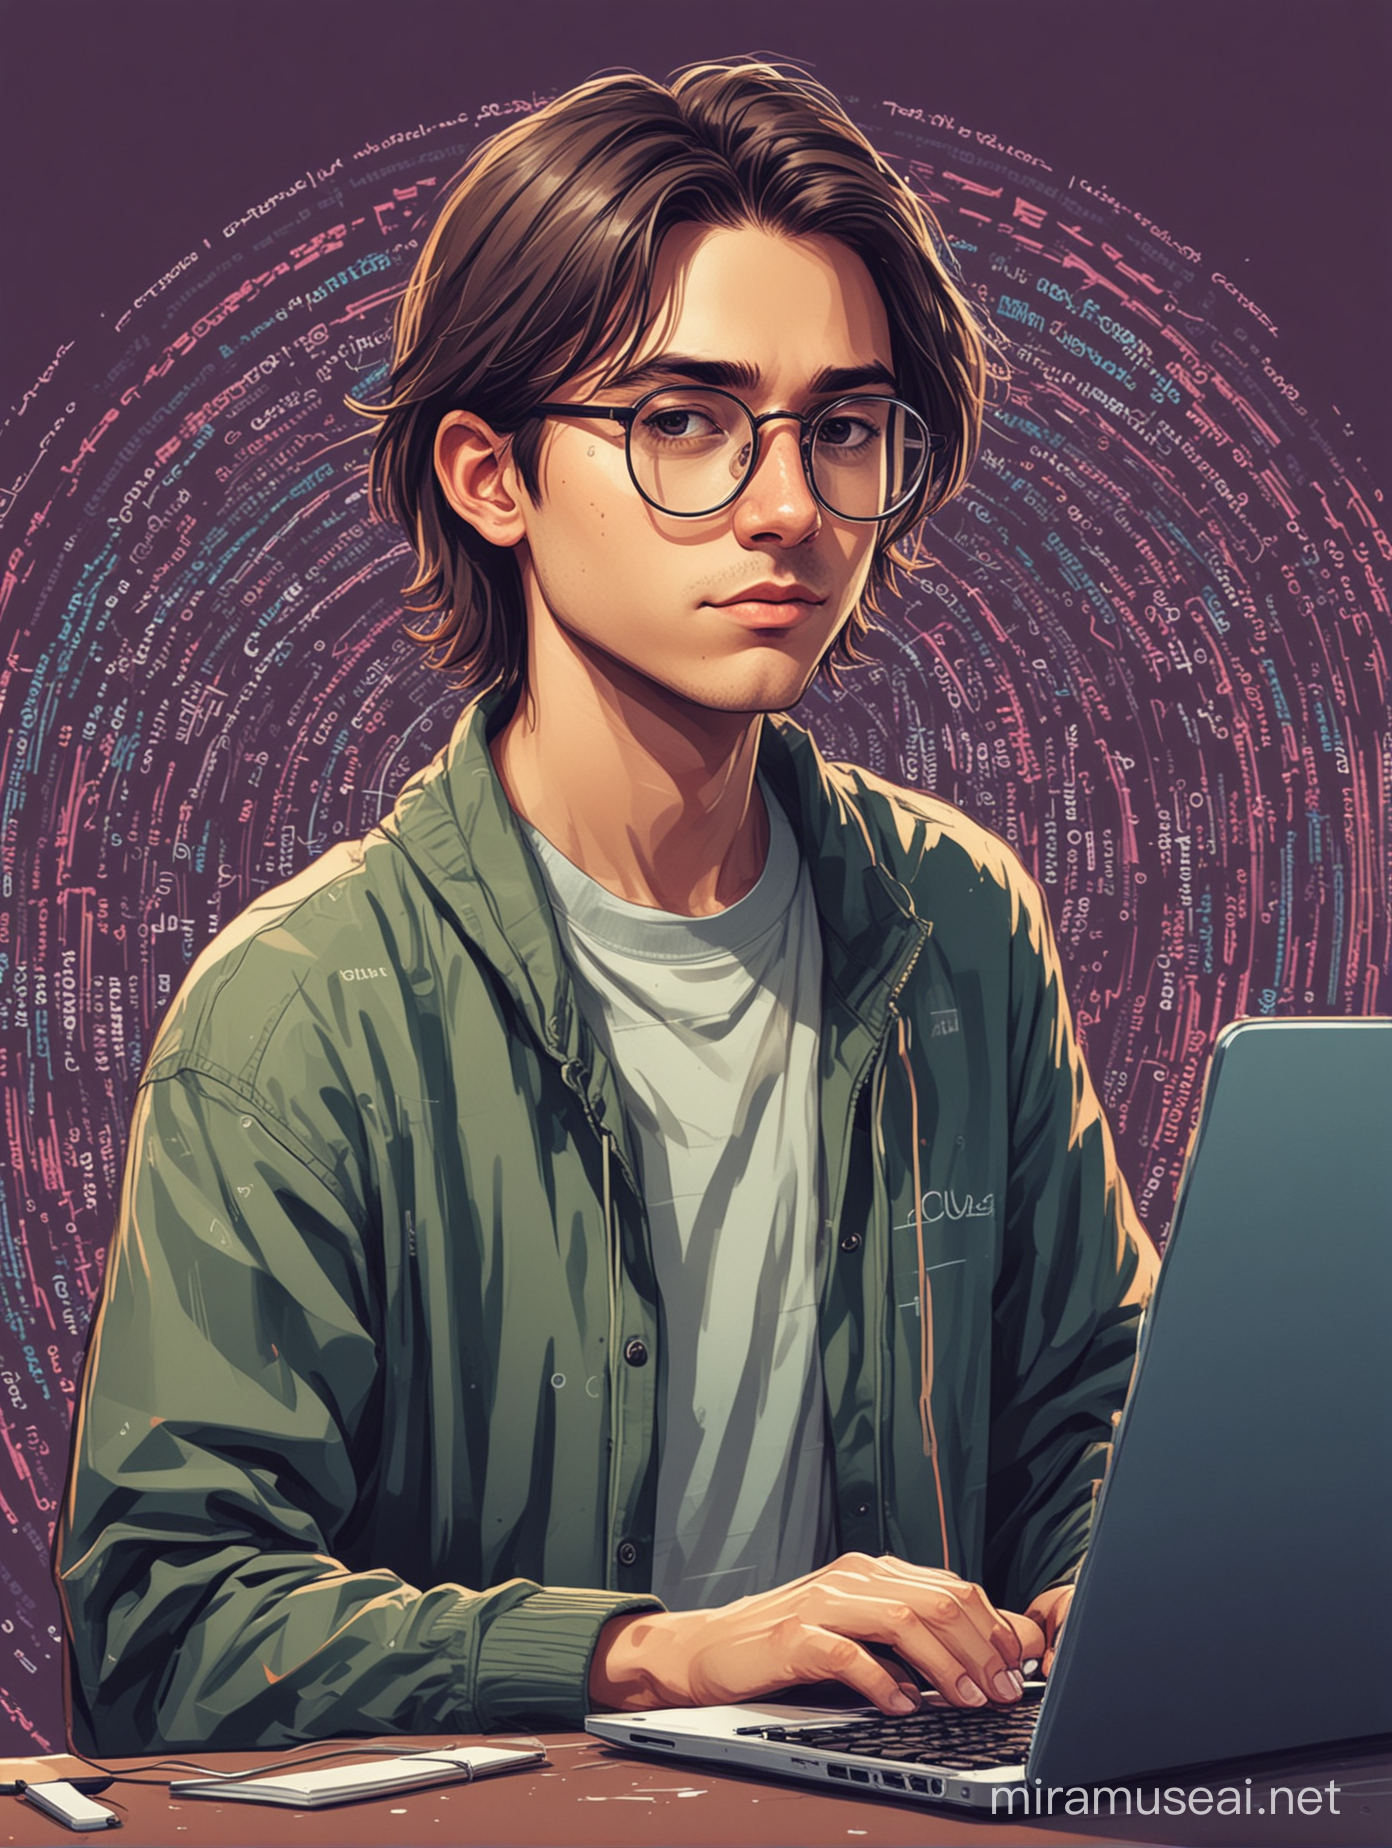 Create an image of a 19/20-year-old male programmer with shoulder-length hair and circular glasses, depicted standing behind a laptop with a focused expression on his face, surrounded by lines of code.

ethical hacker, cartoon style, tech color palette